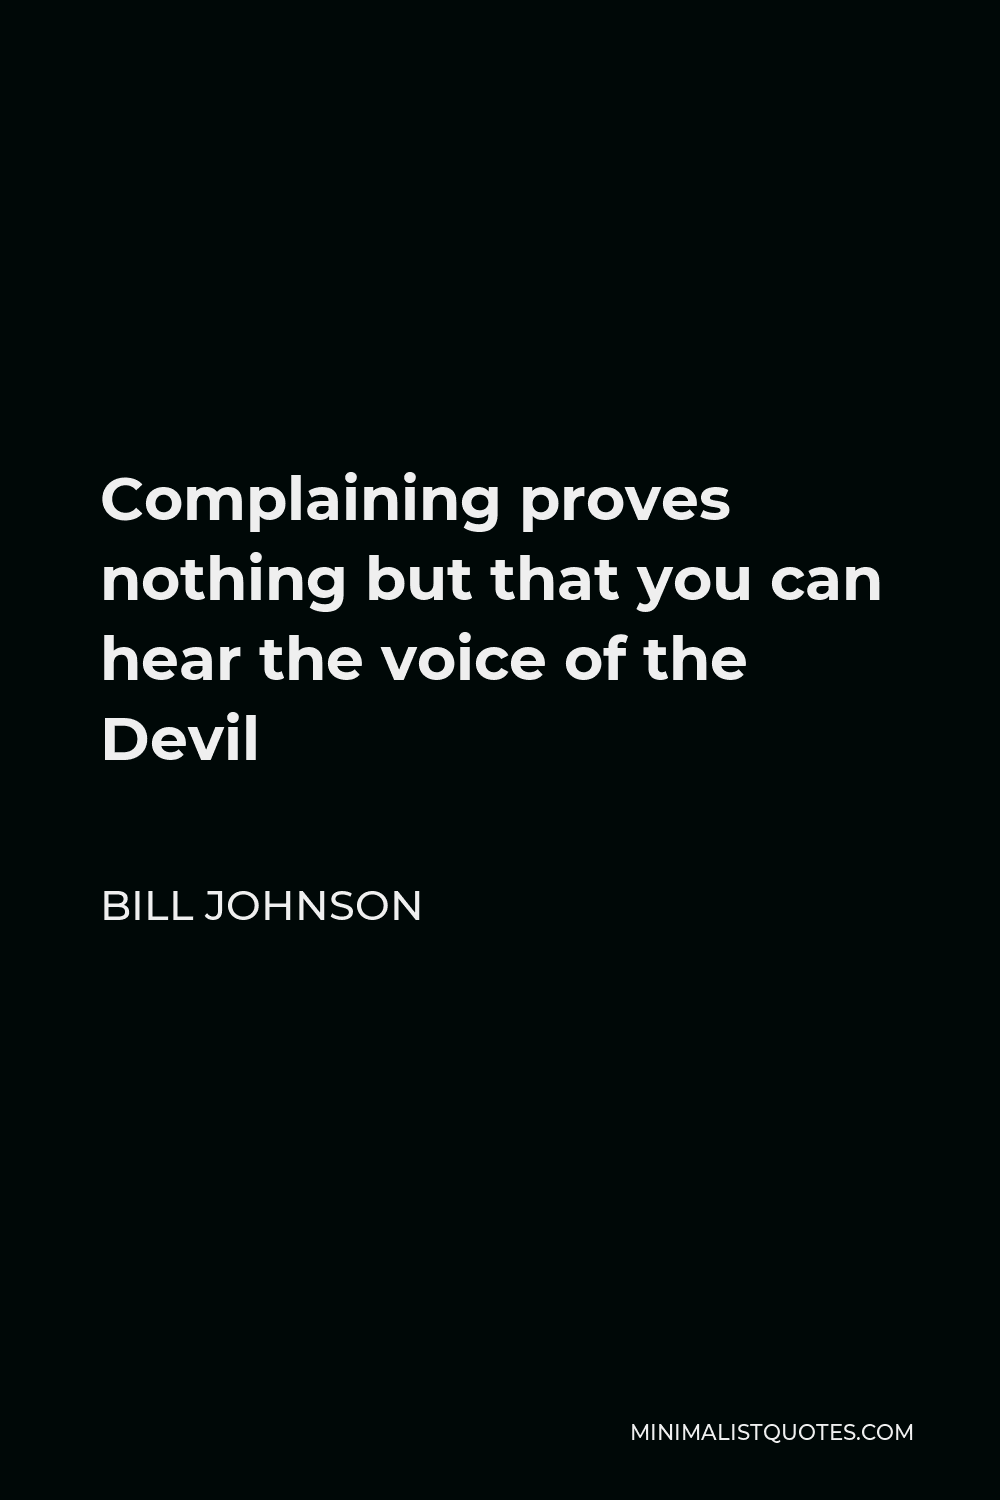 Bill Johnson Quote - Complaining proves nothing but that you can hear the voice of the Devil